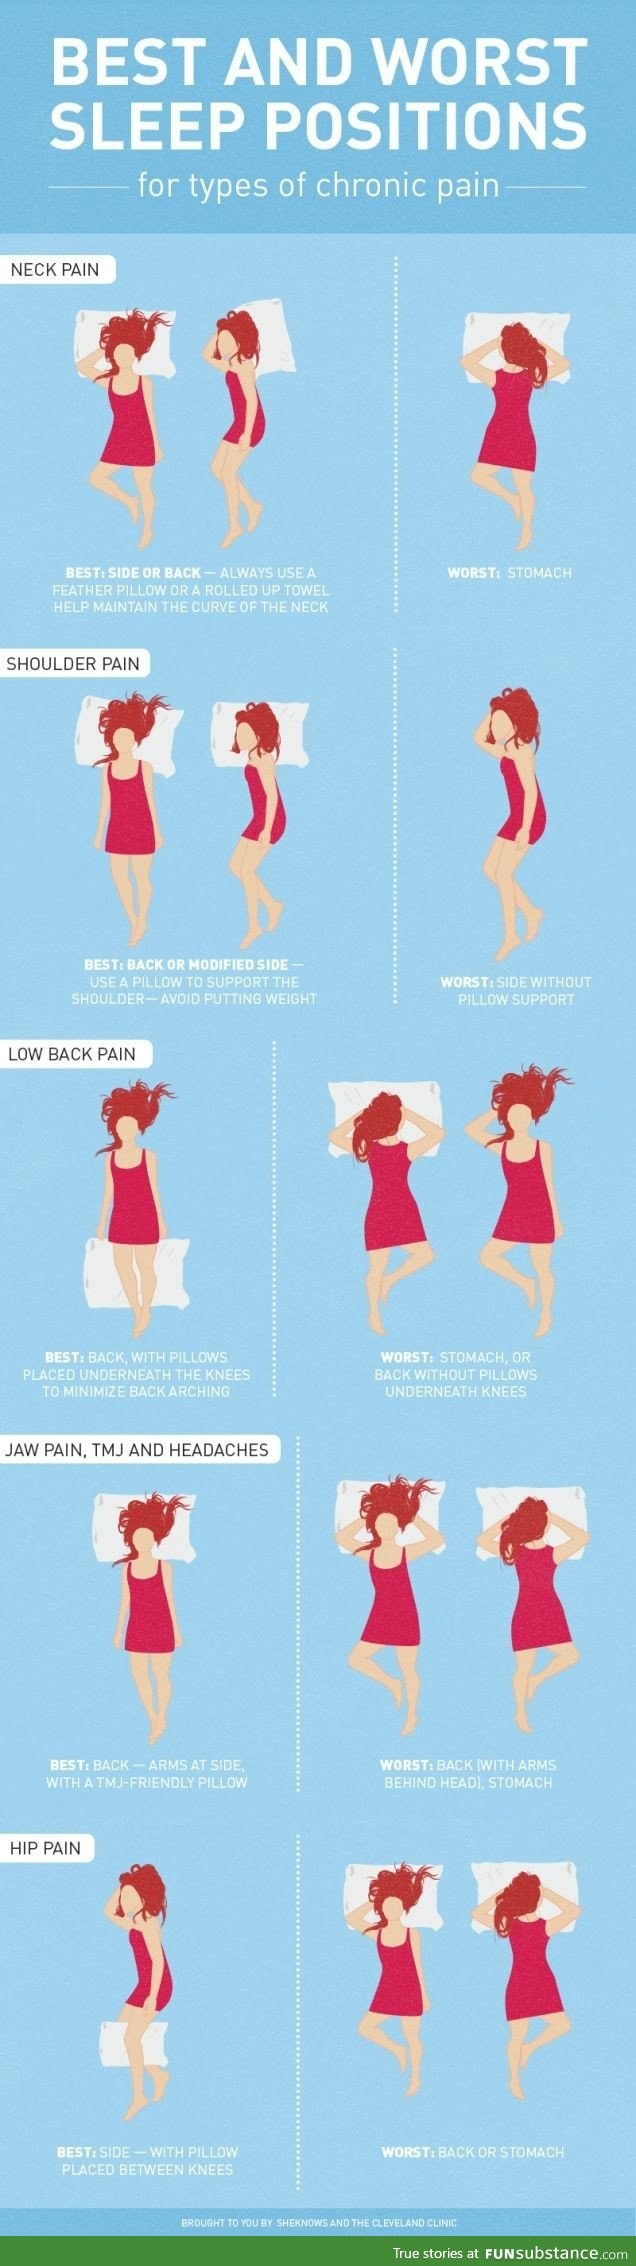 Best and worst sleeping positions for common pains